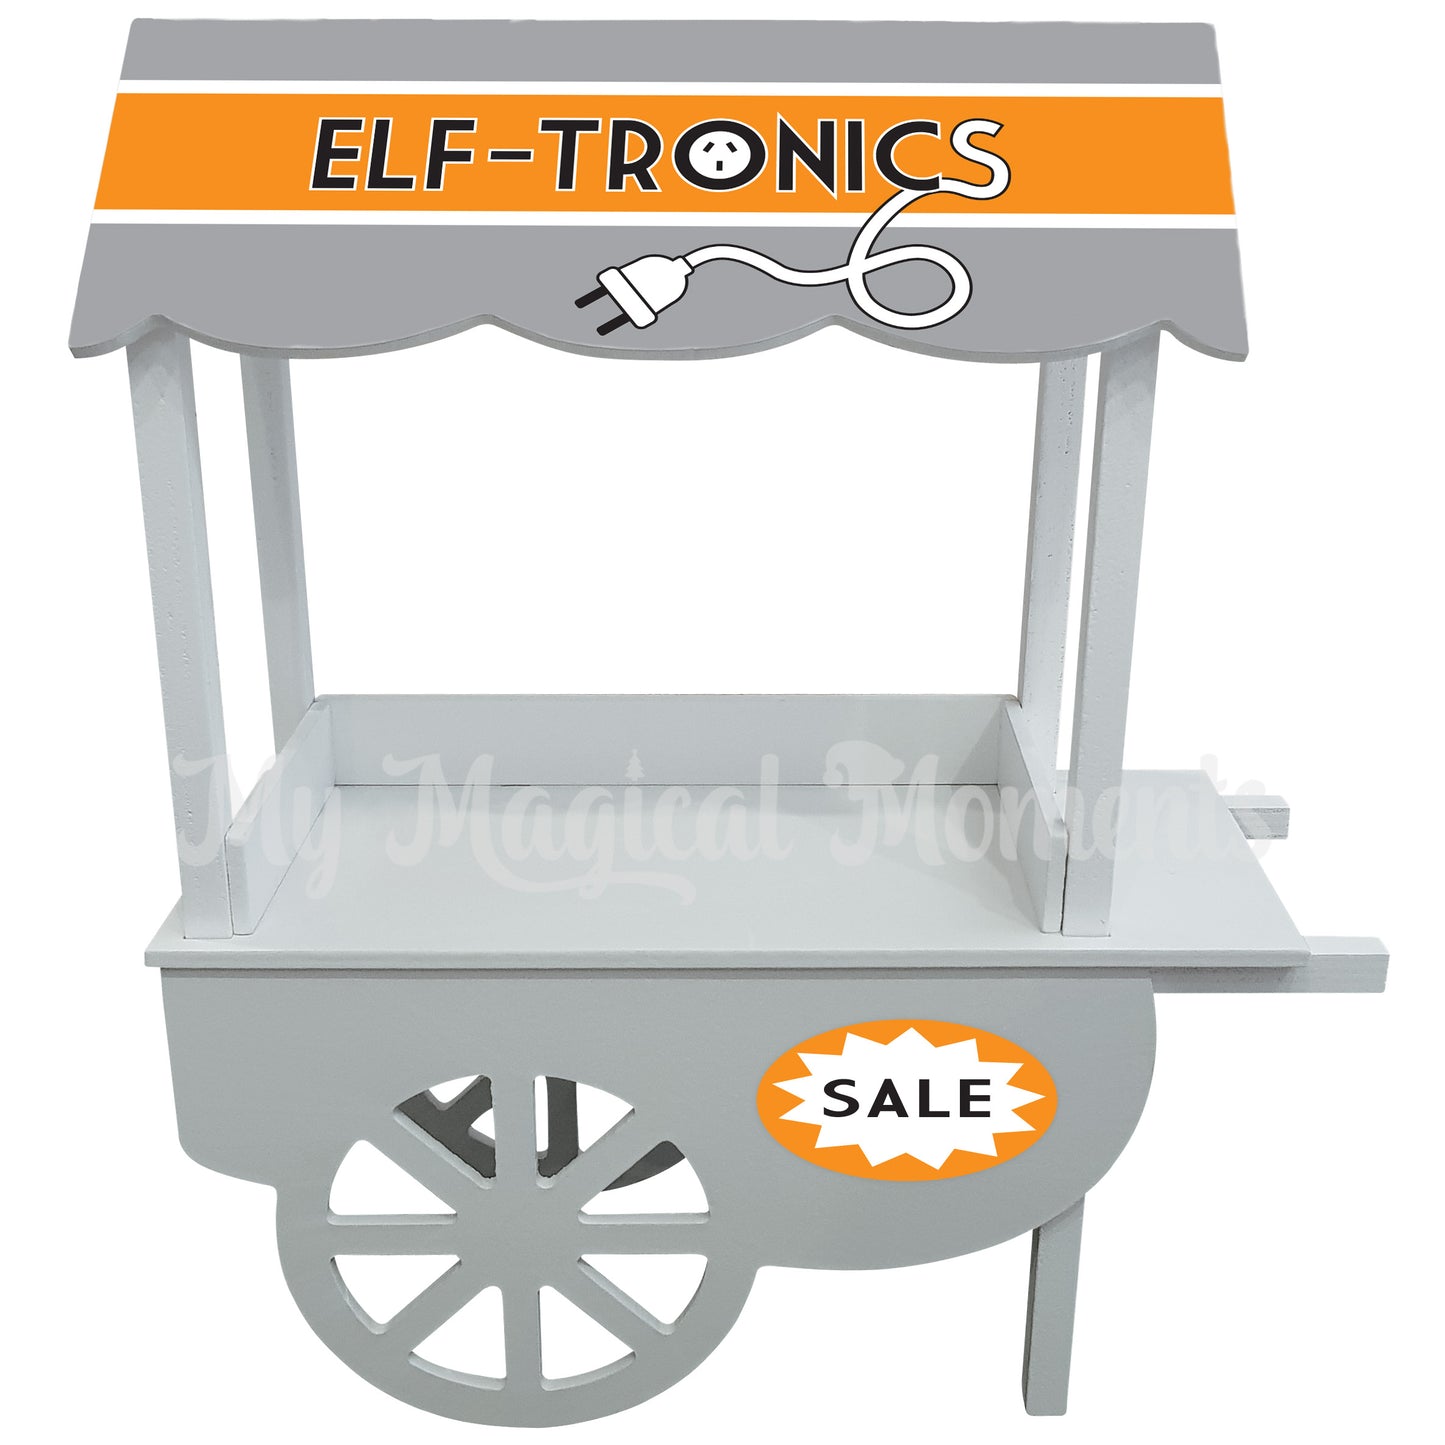 Elf electrical printable store front